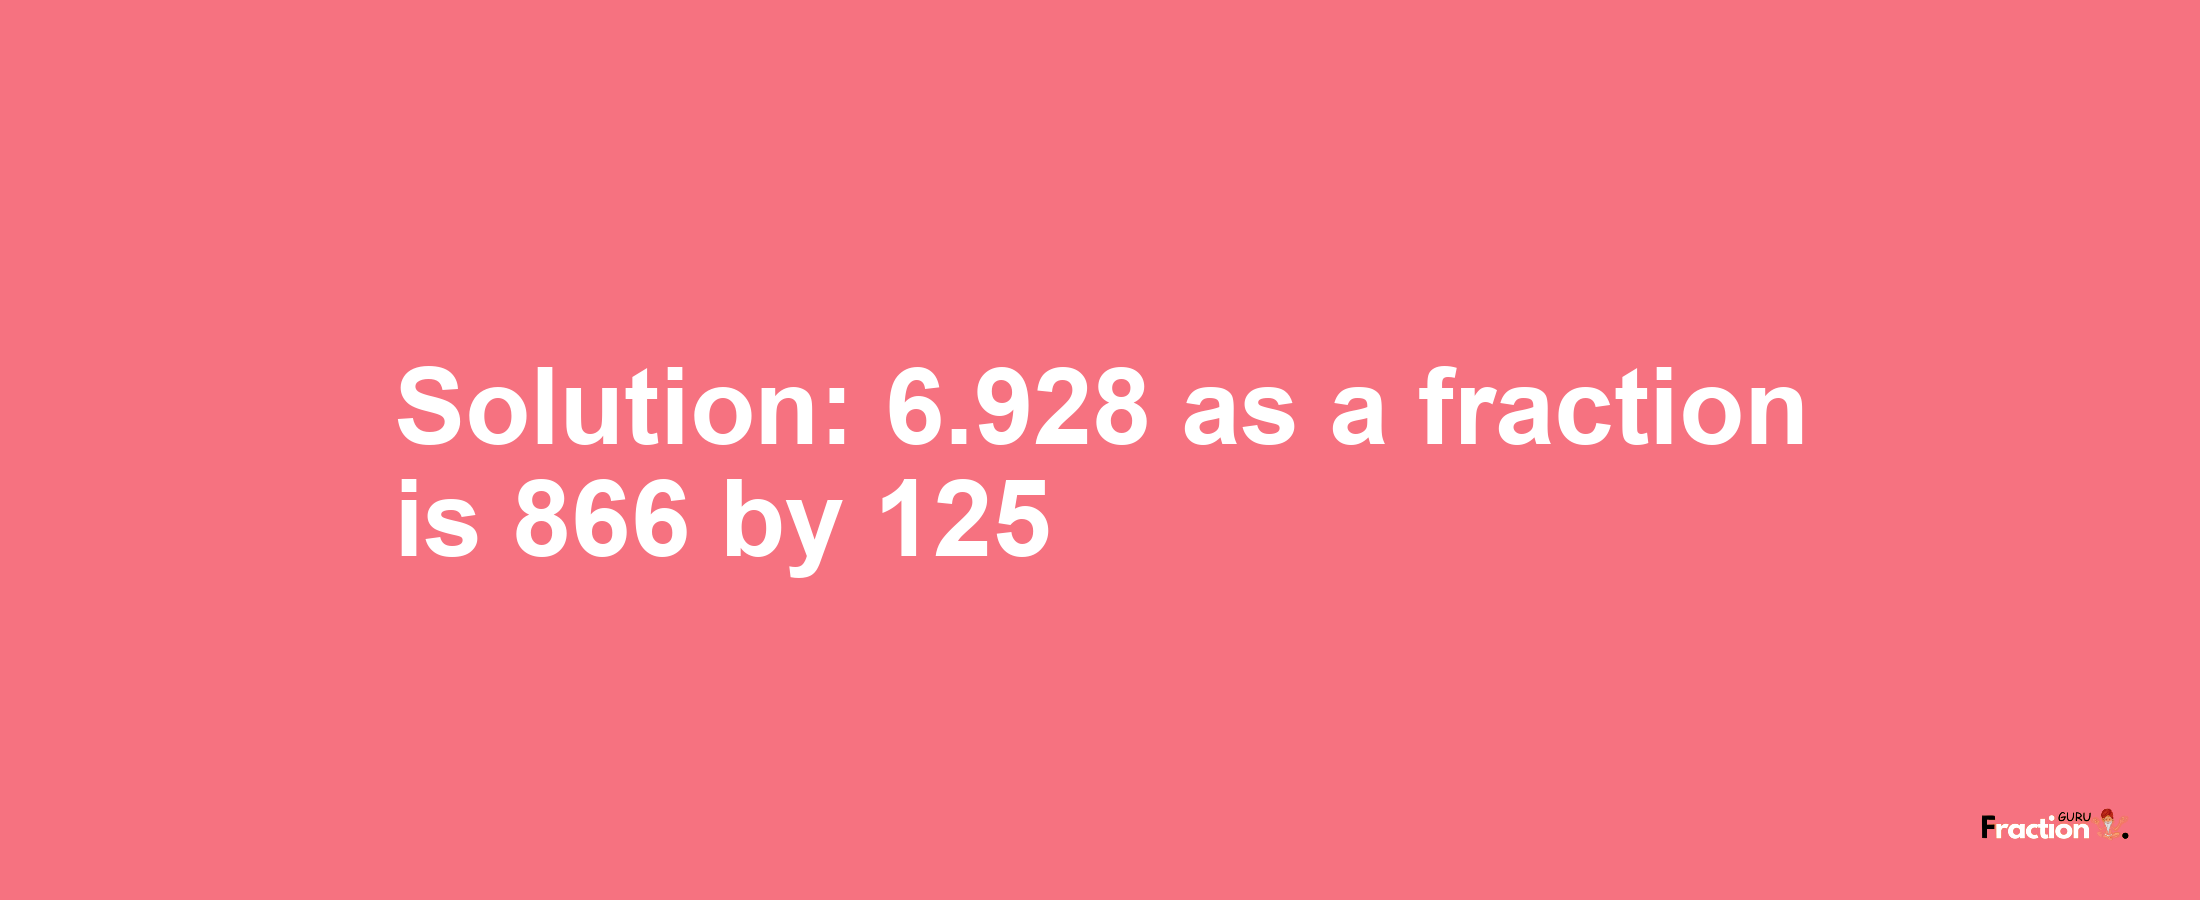 Solution:6.928 as a fraction is 866/125